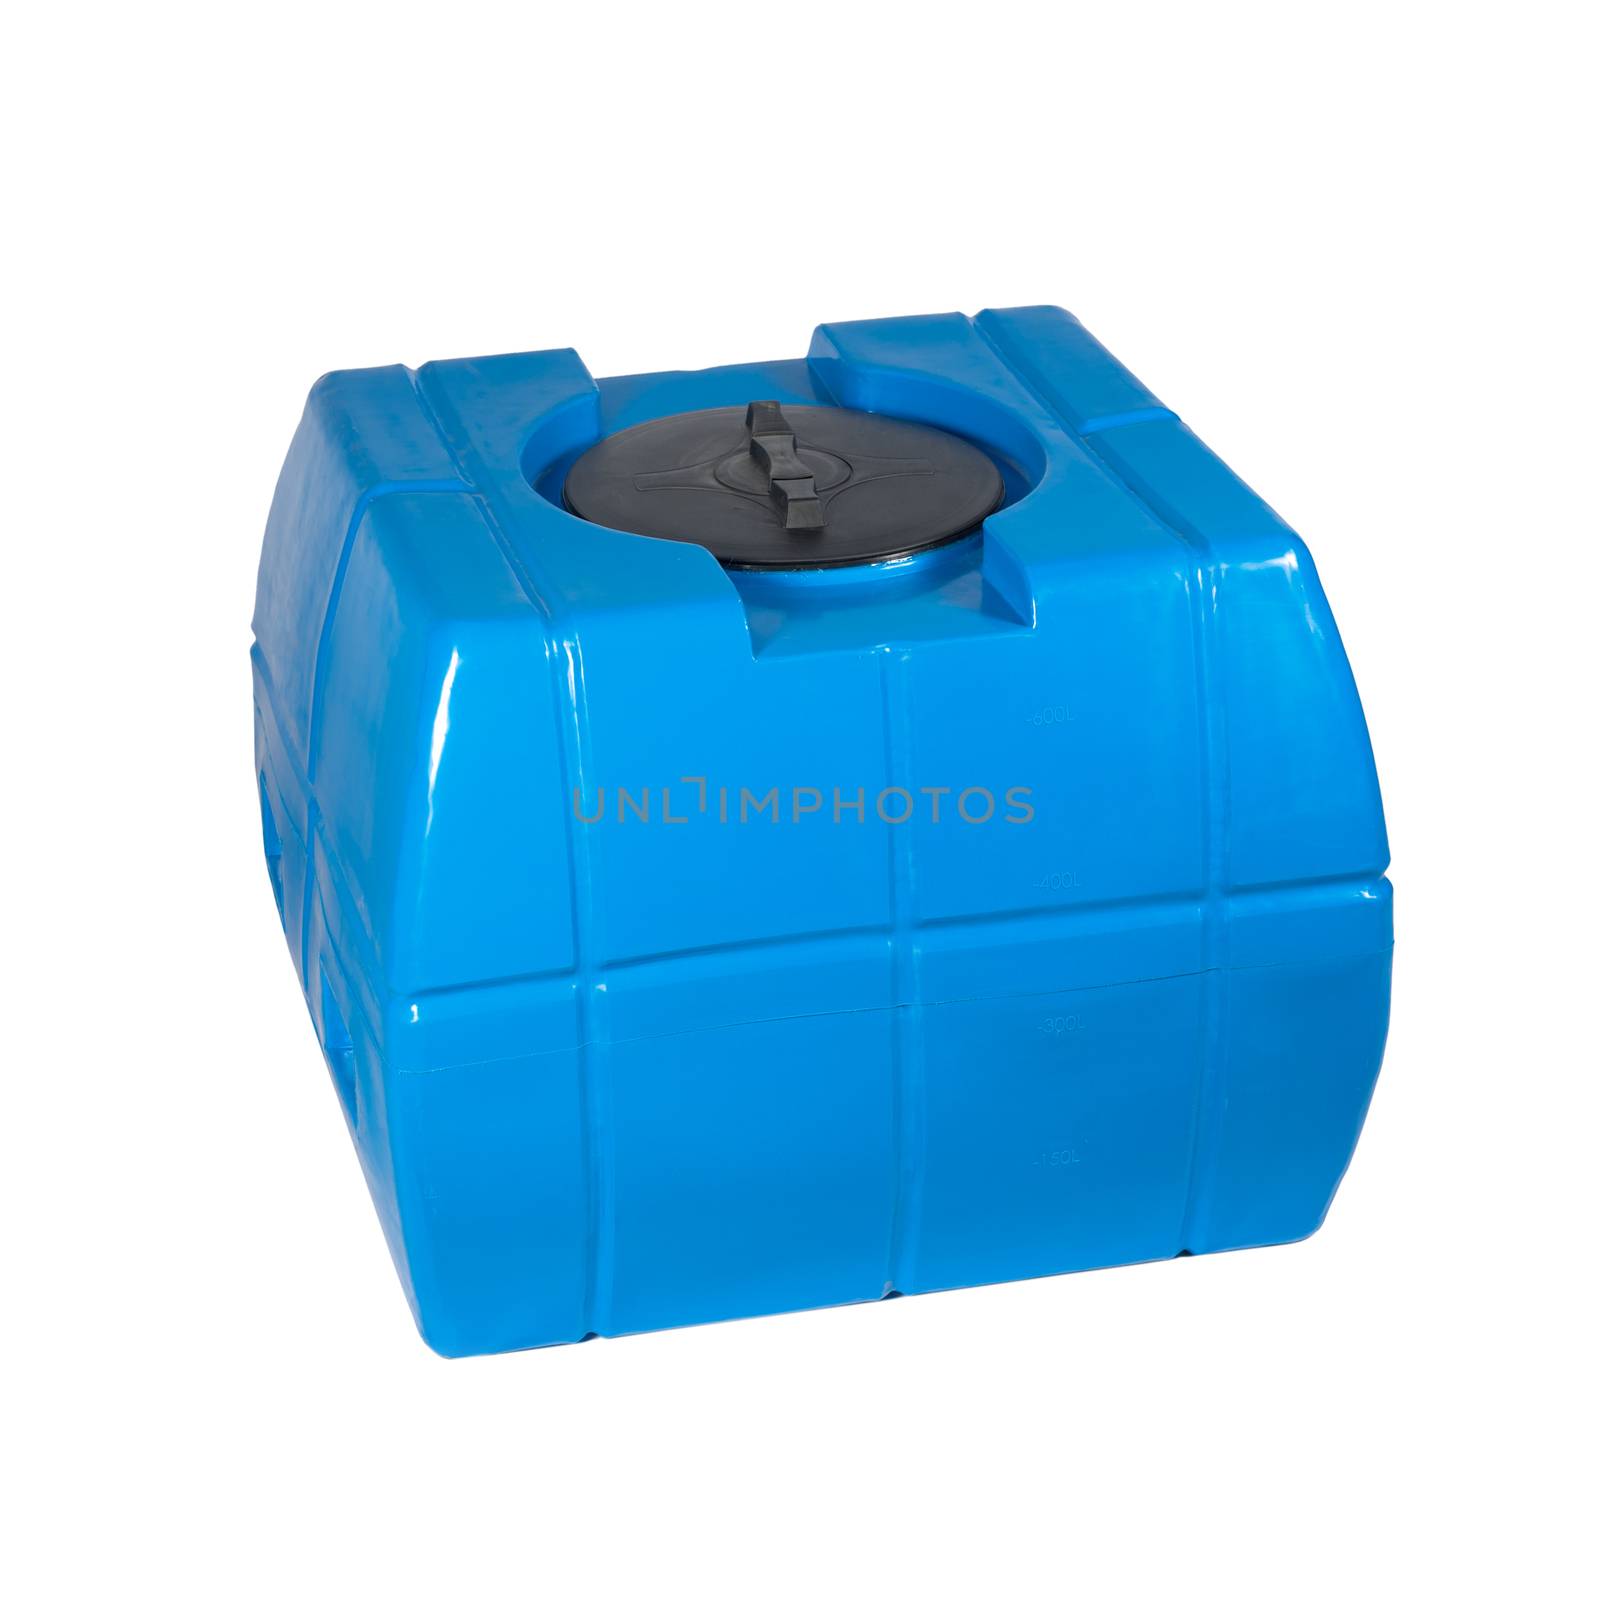 Big polyethylene container of 400 l. for accumulation, storage and transportation of not only technical or drinking water, but also a variety of dry and liquid food products, as well as oils and chemicals.